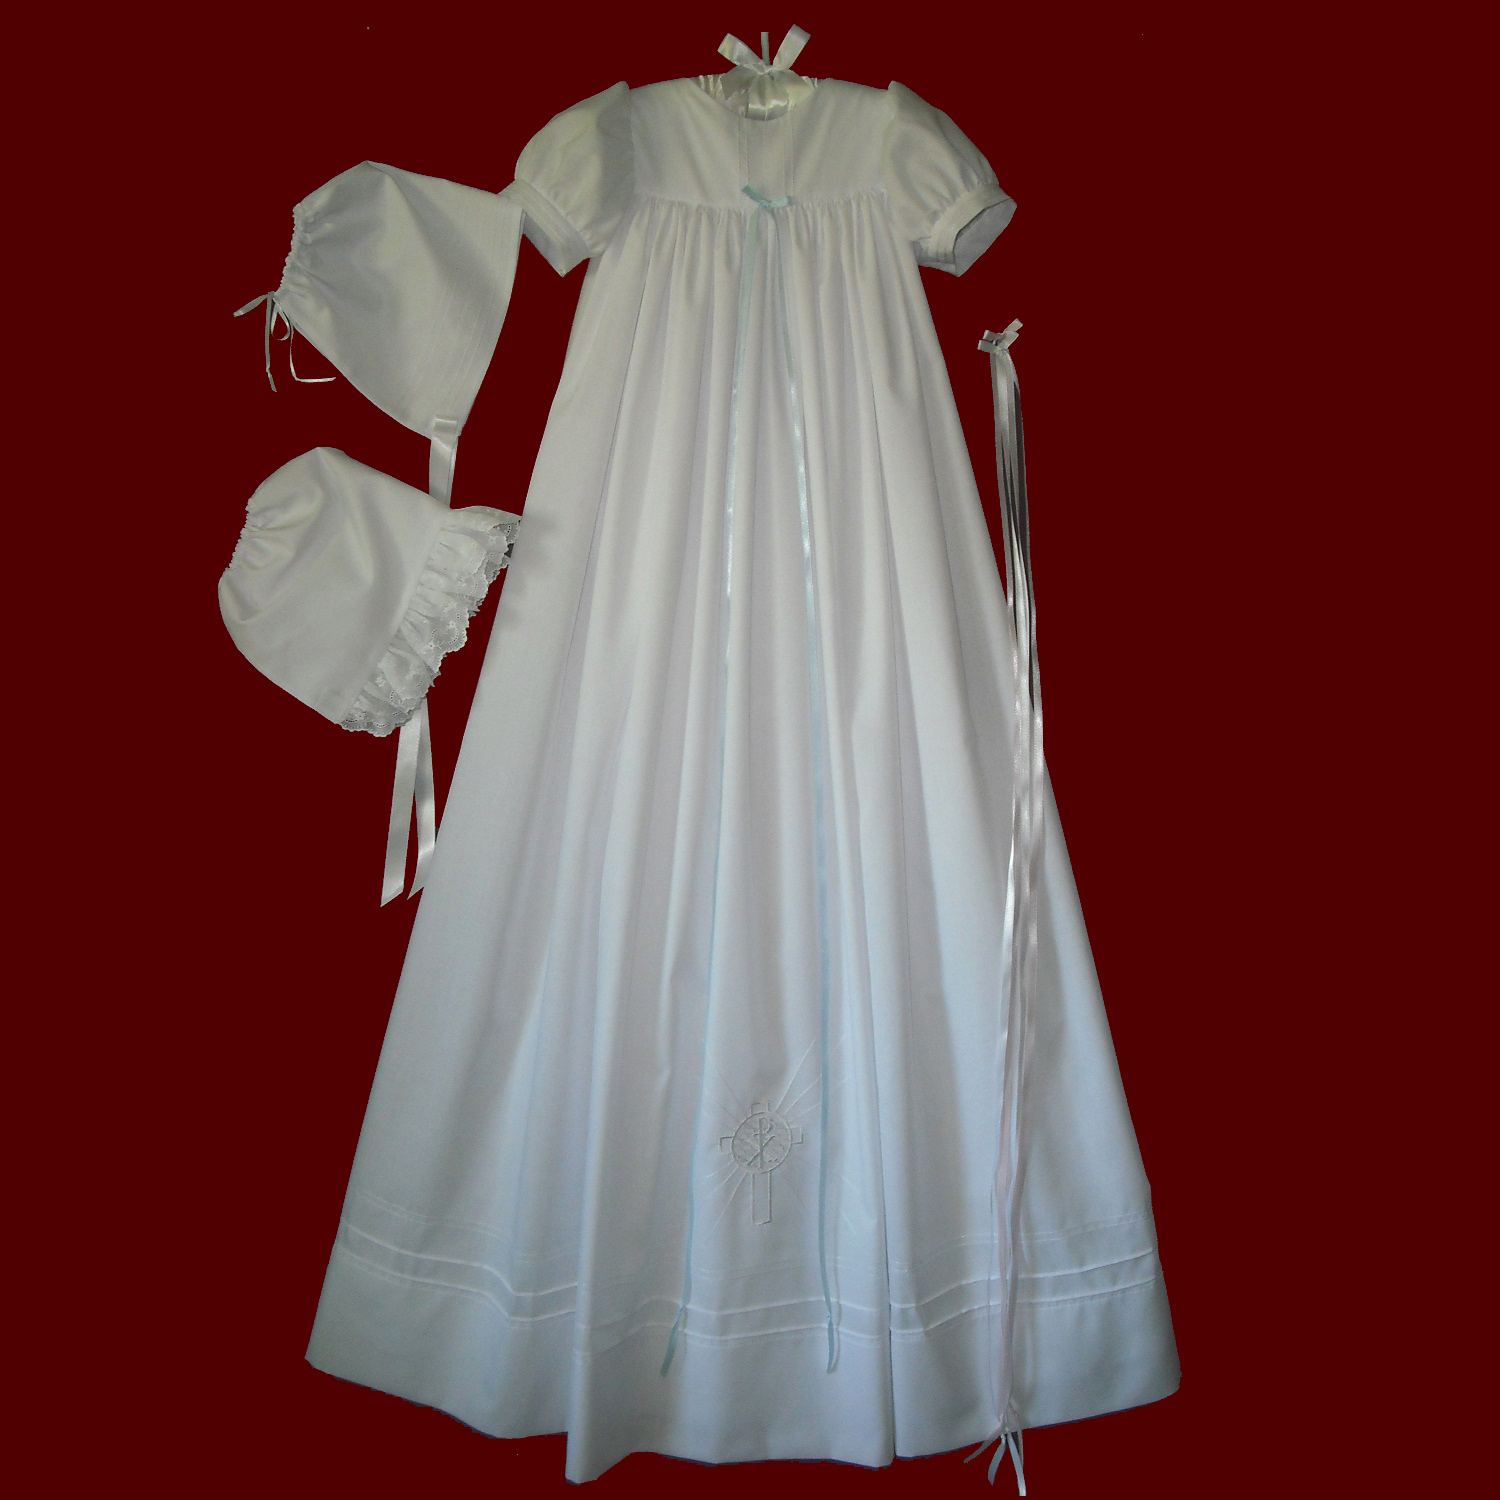 Unisex Embroidered Cross Christening Gown